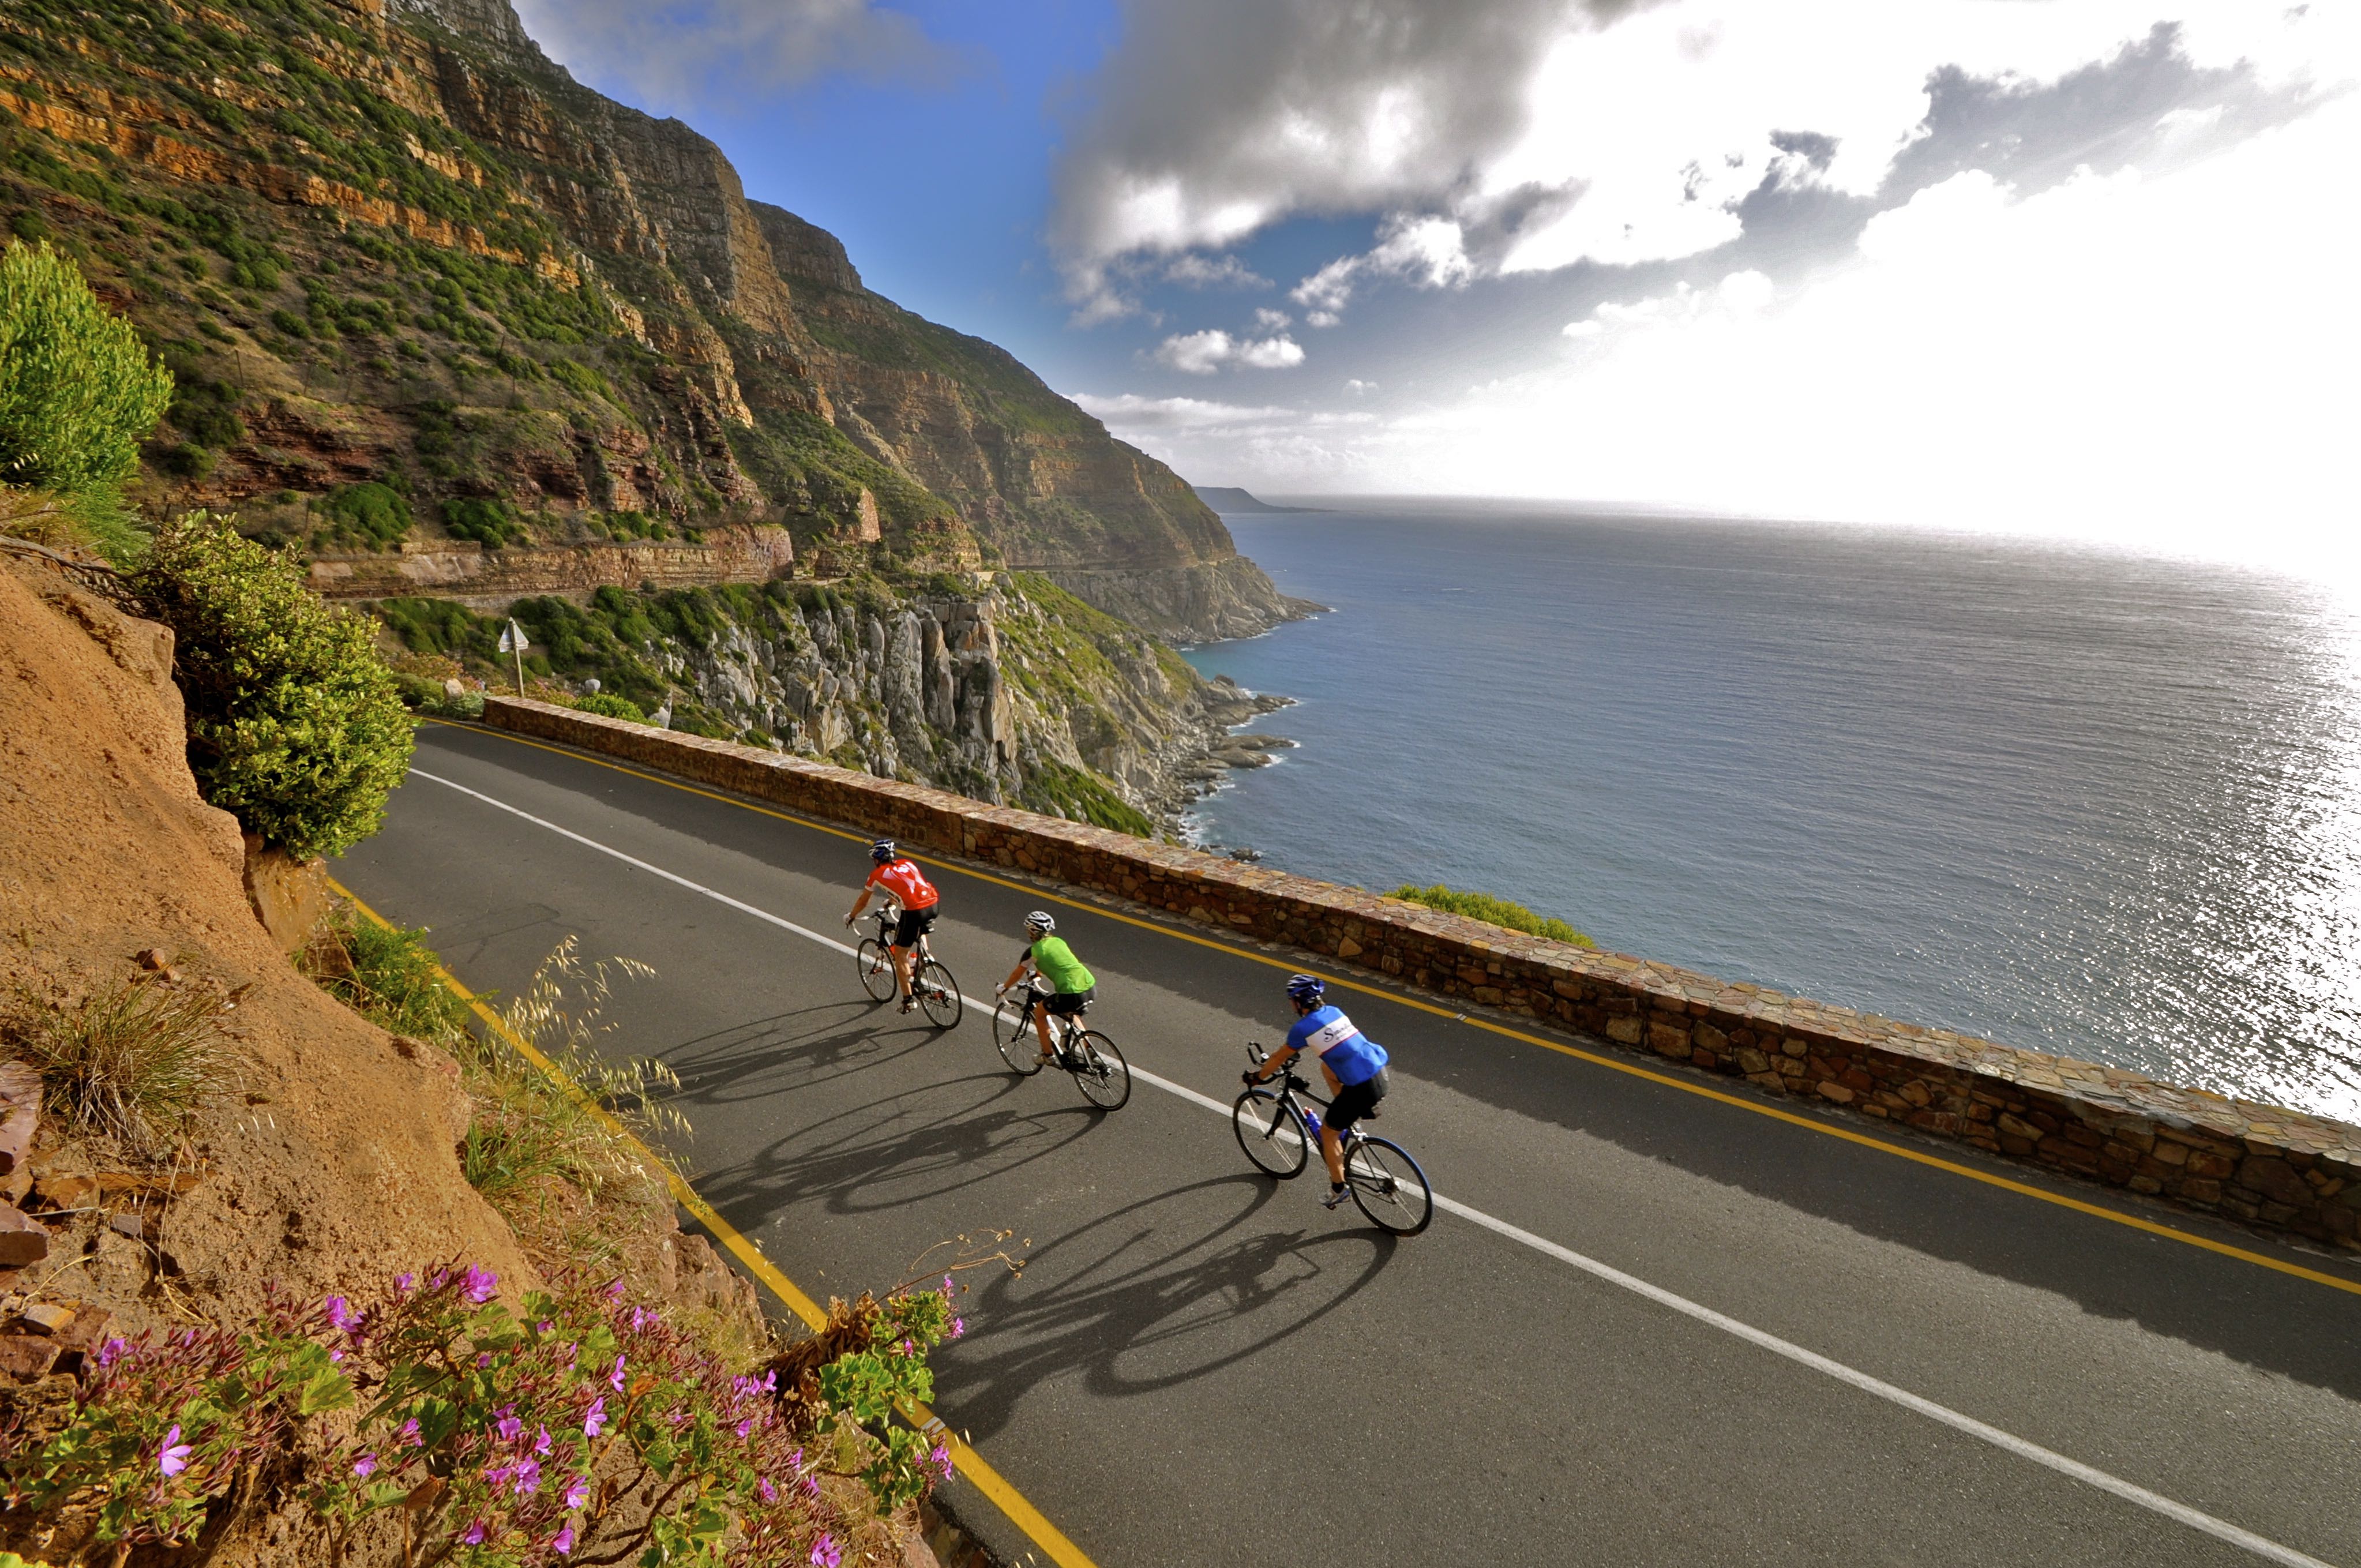 Cape Town, Chapmans Peak, Sea, Mountains, Cycling, Road, Clouds, South Africa Wallpaper